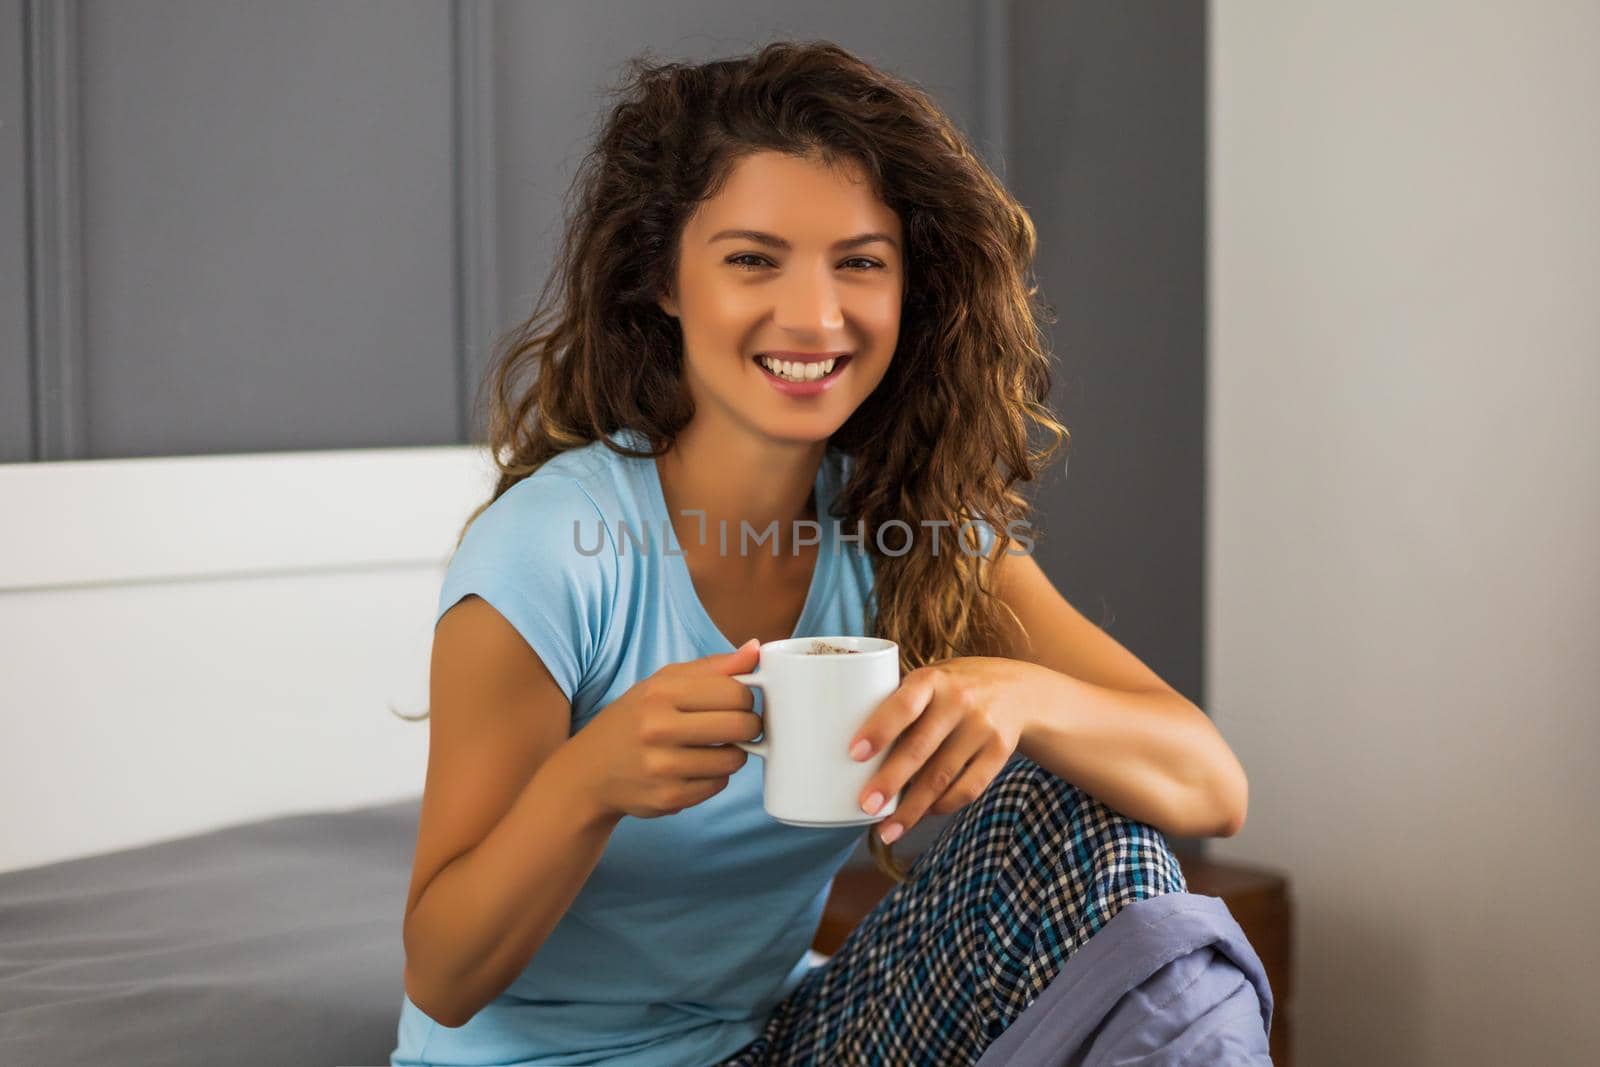 Beautiful woman enjoys drinking coffee in her bed.